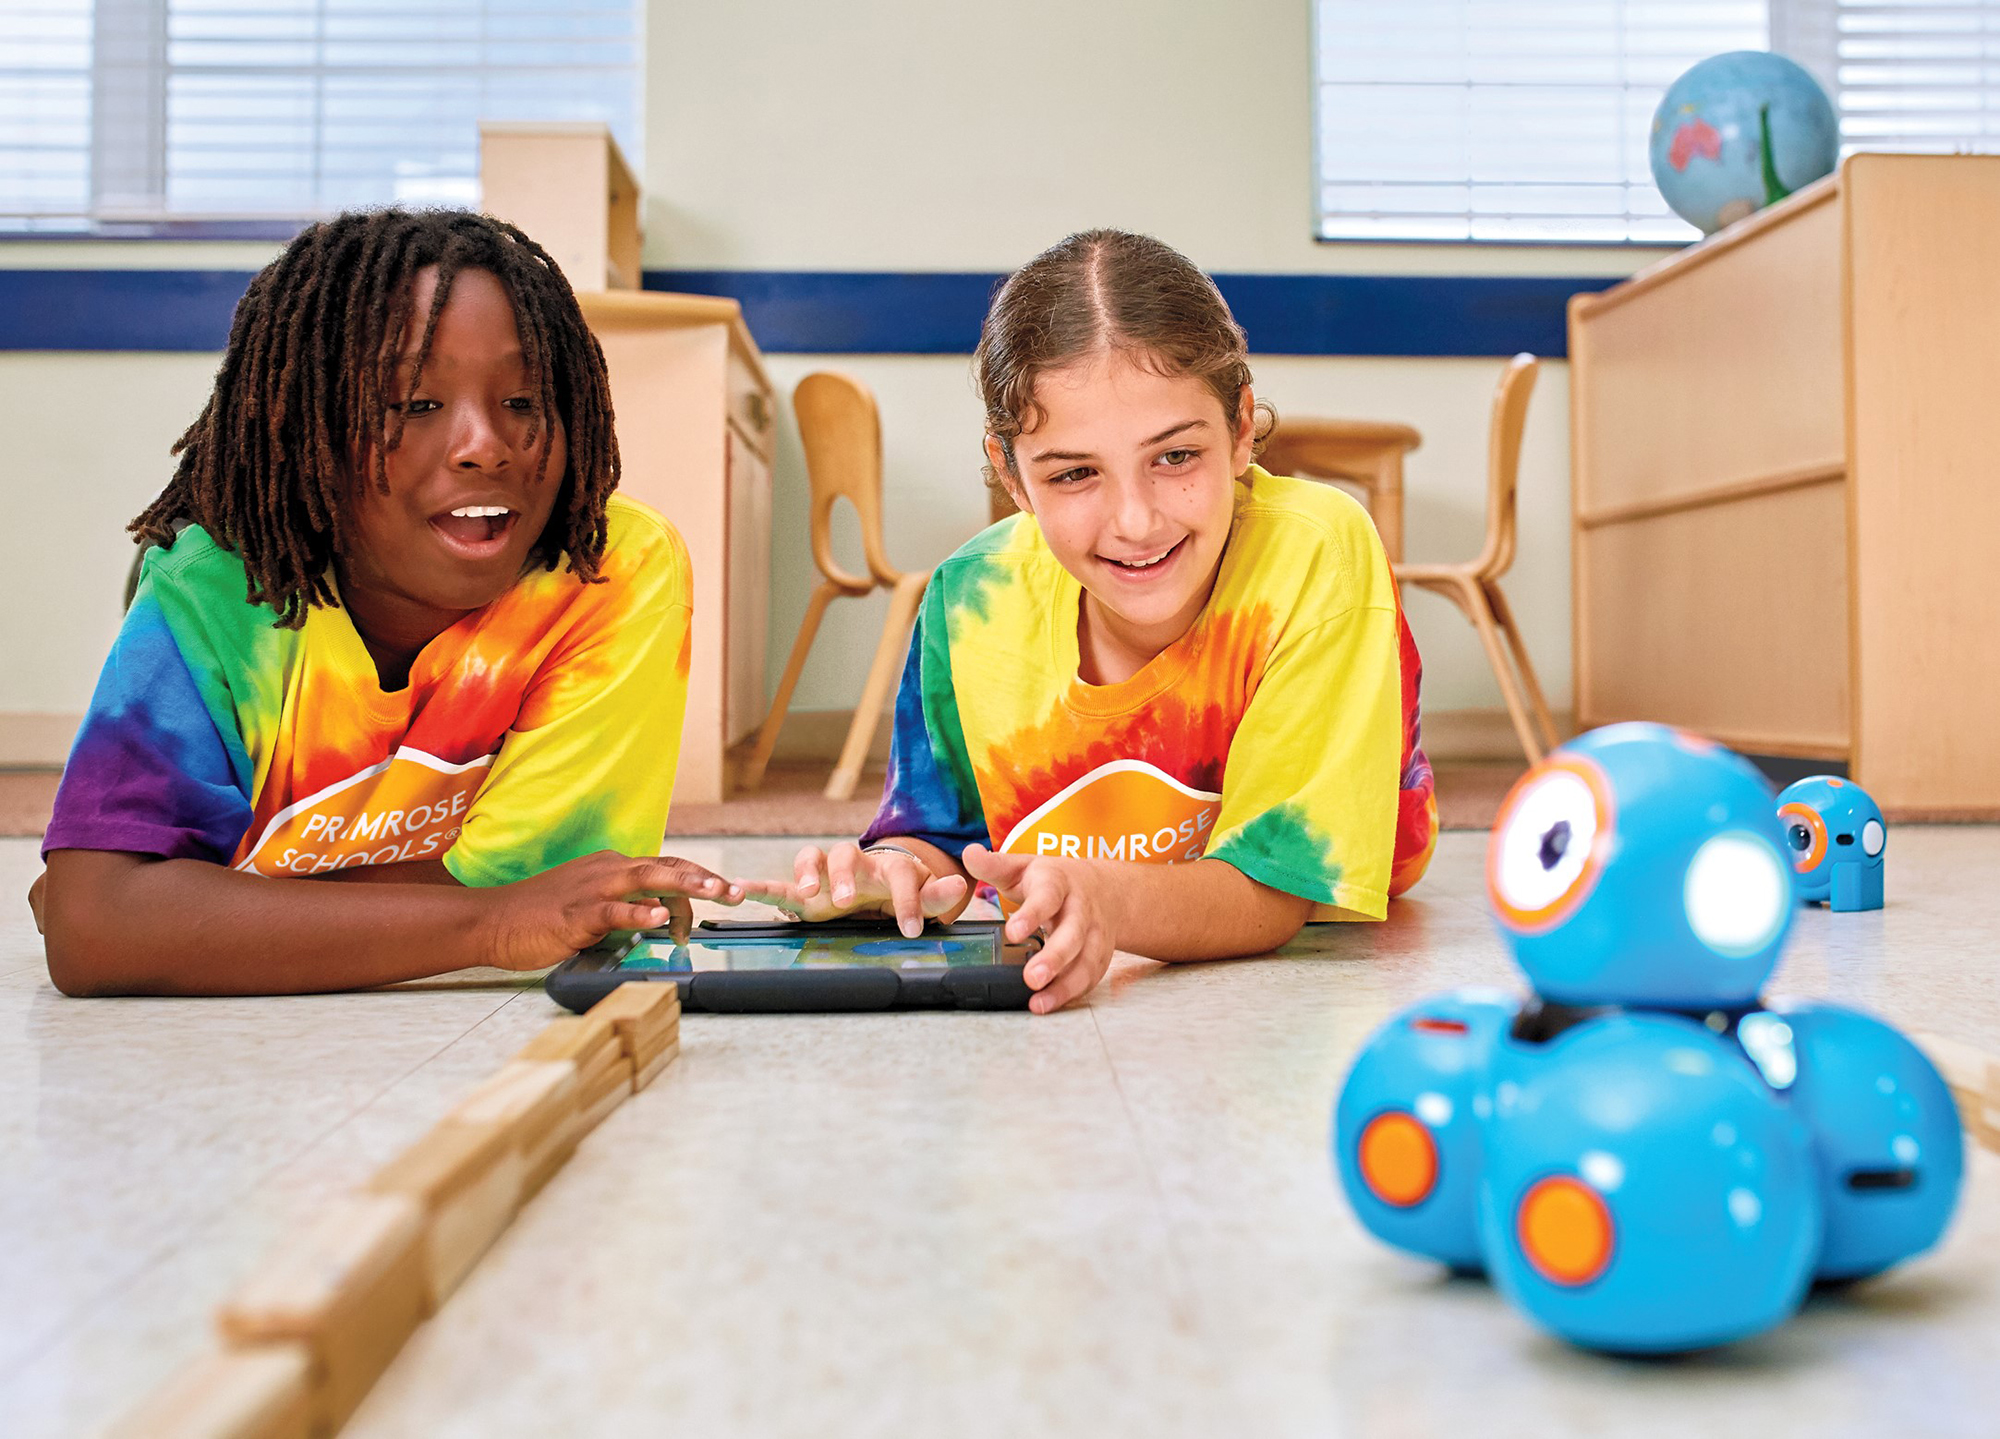 Children interact with a programmable robot named Dash through coding, mazes and special missions at the Primrose Schools Summer Adventure Club, furthering STEM-based learning and robotics education.